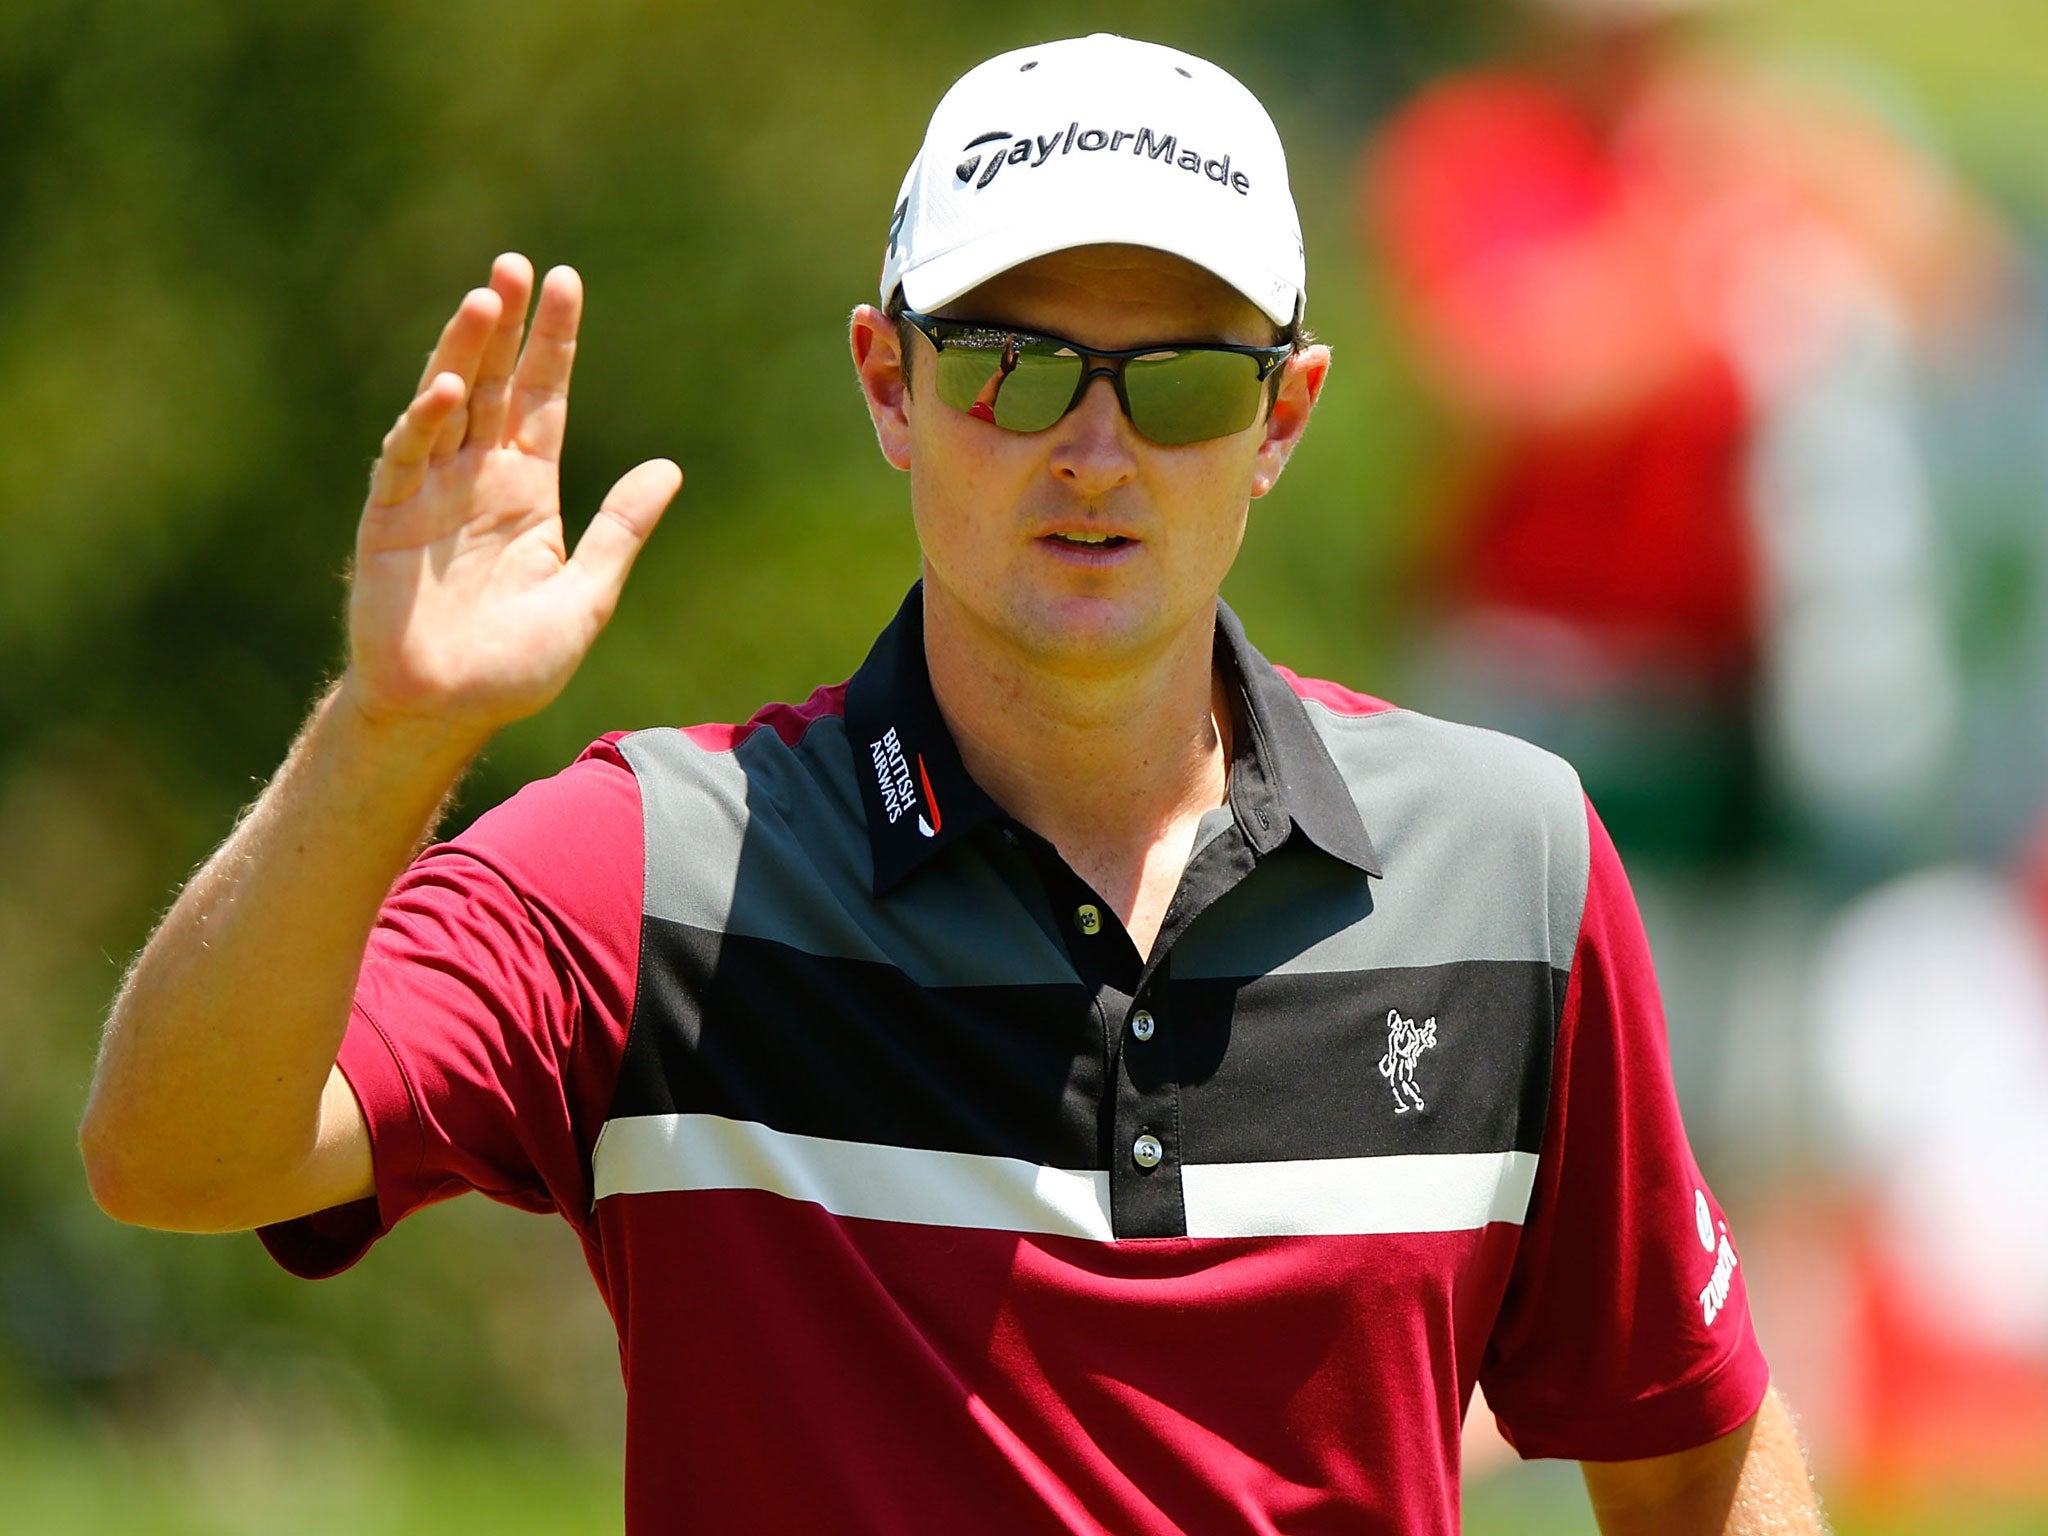 Justin Rose has joined the same management company that represents Tiger Woods